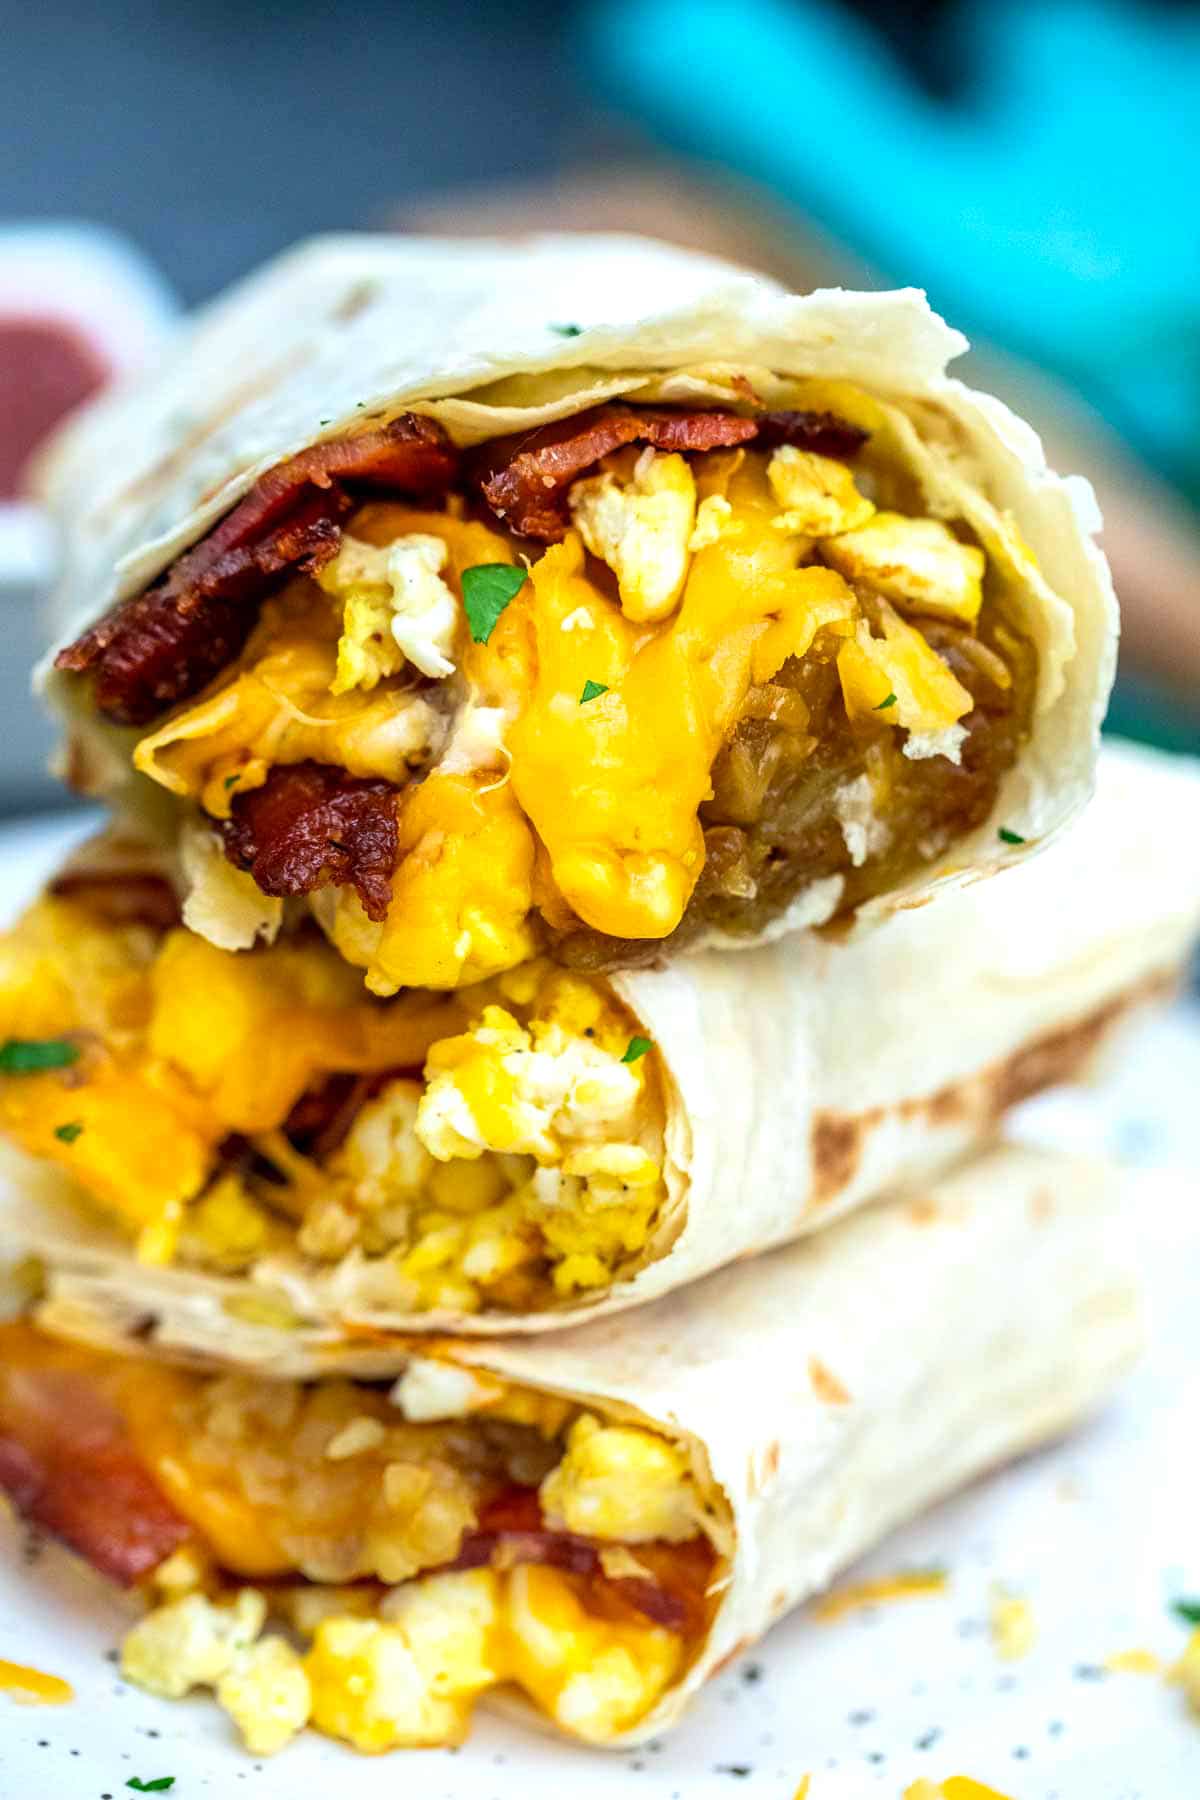 Bacon Egg And Cheese Breakfast Burrito Video Sweet And Savory Meals